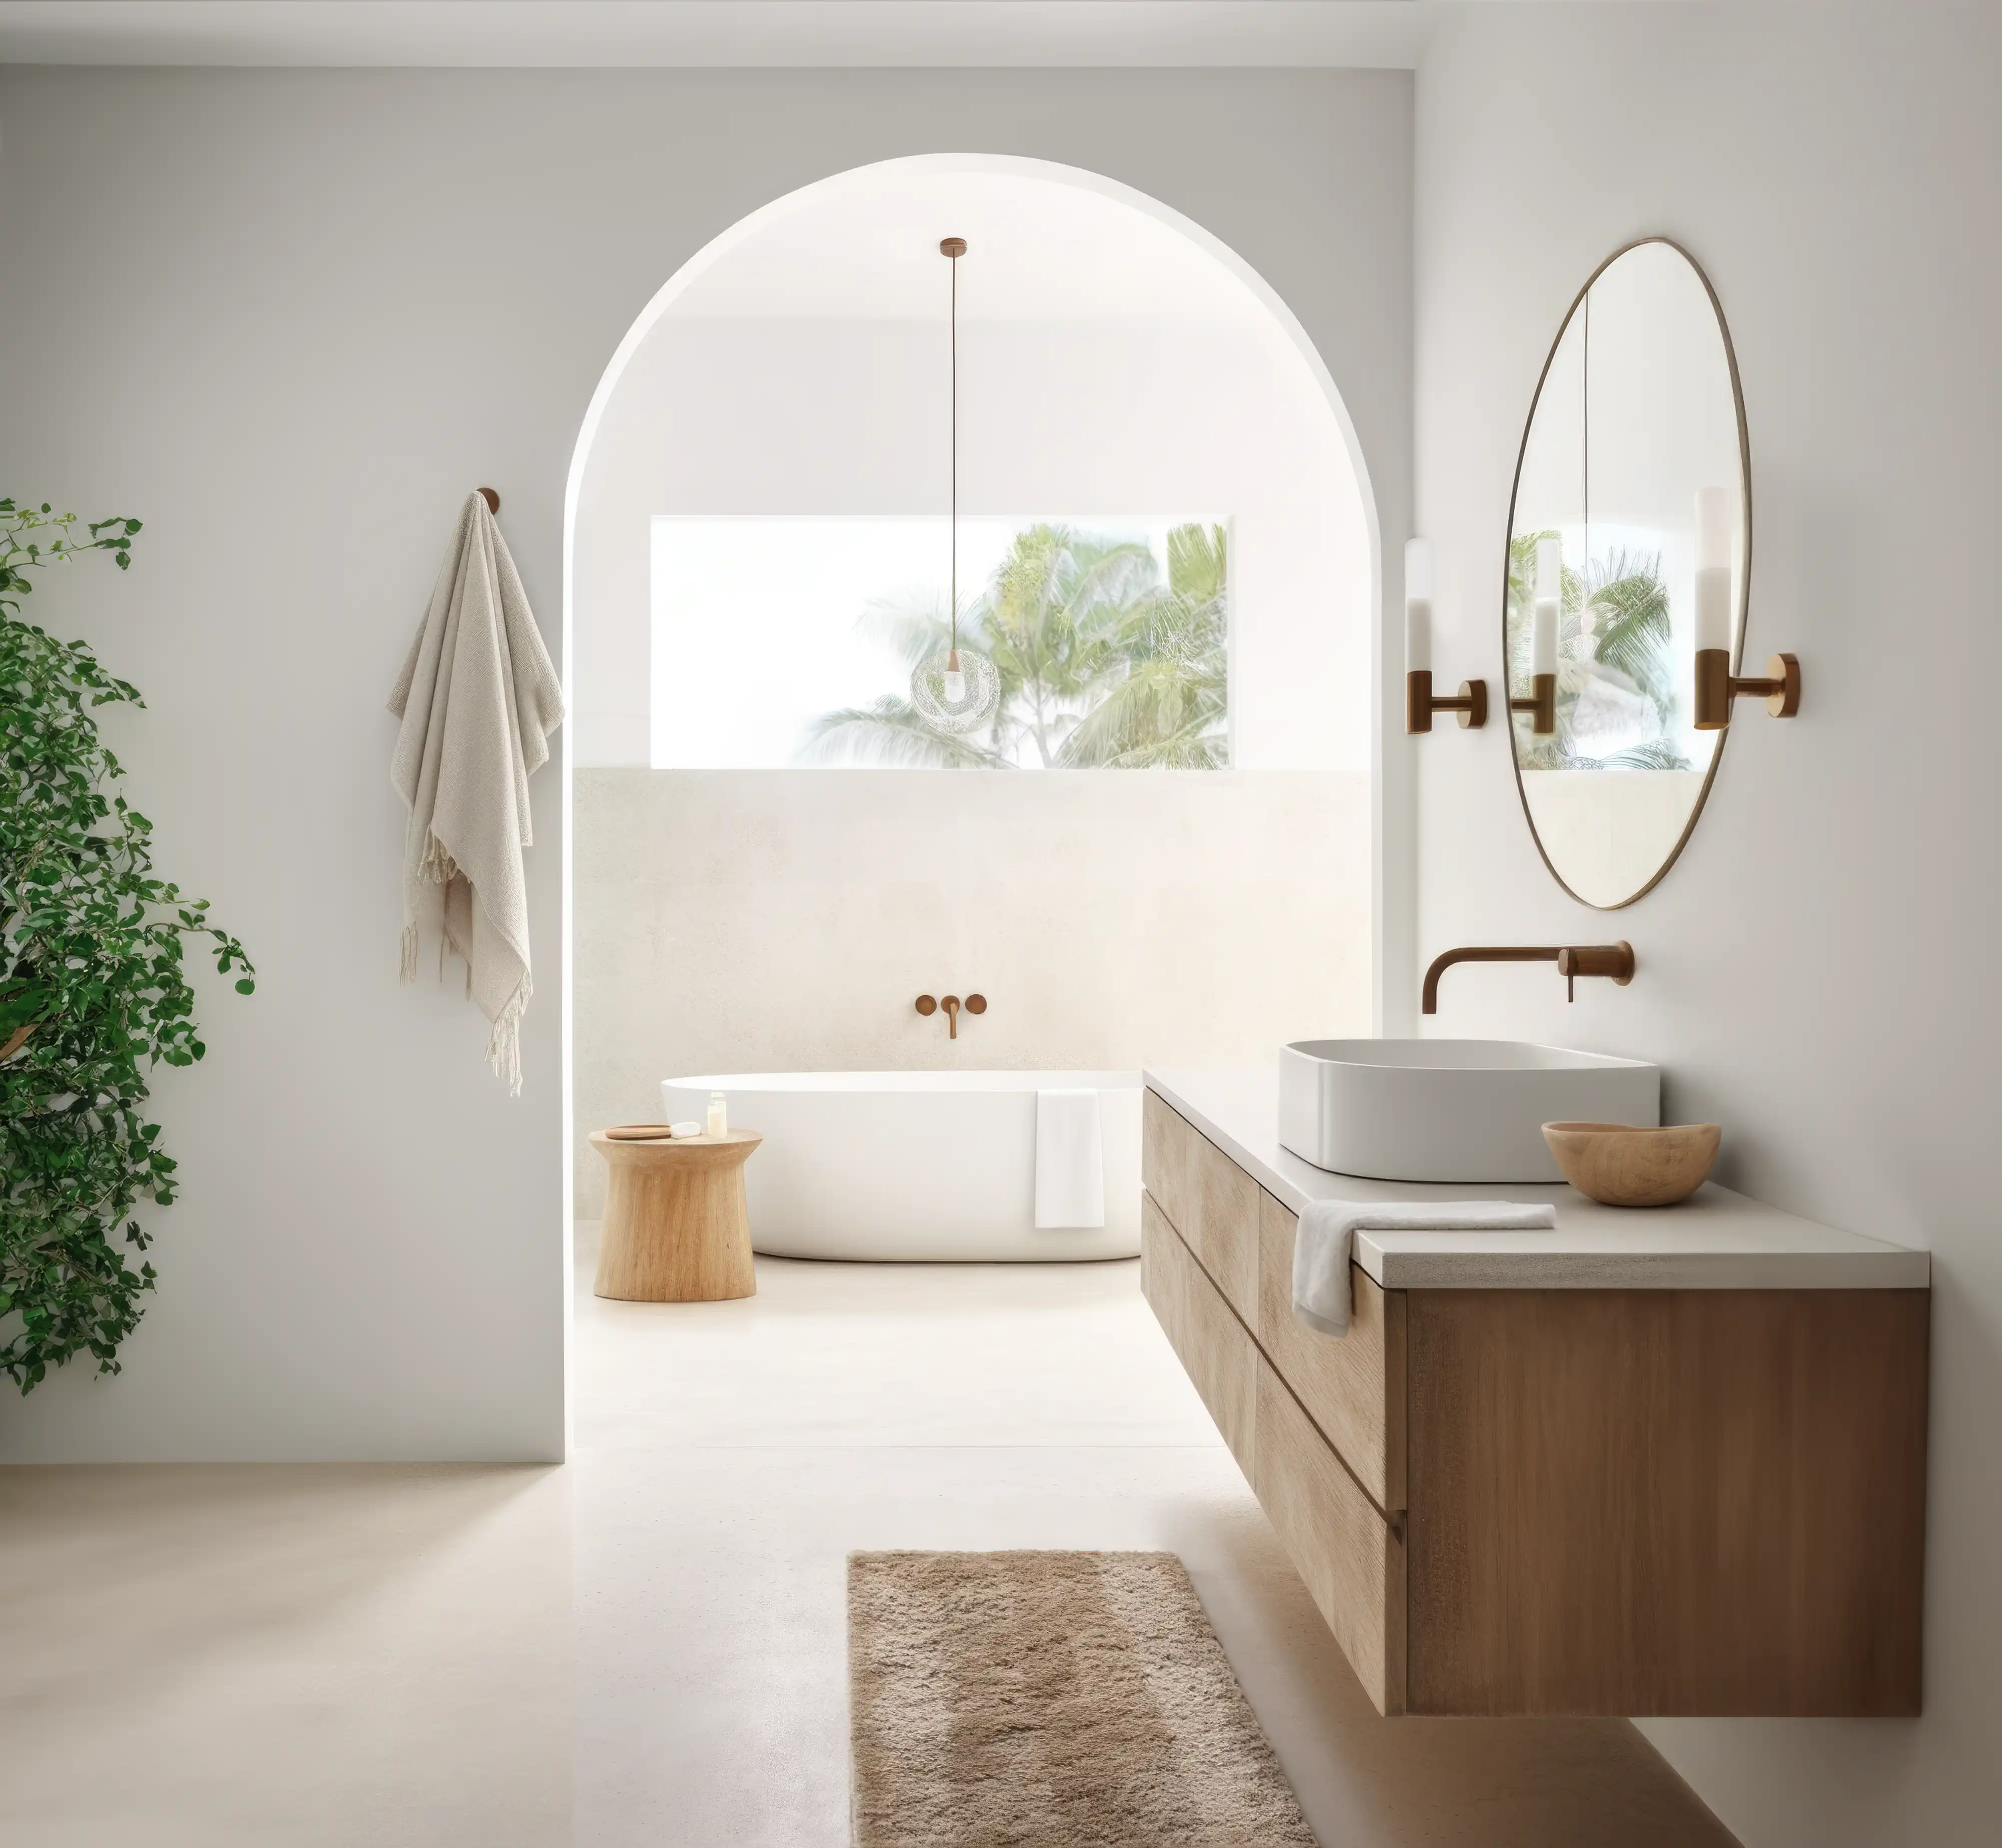 A modern bathroom with a white bathtub, a wooden vanity and a window with a tropical view, interior by Sarah Brown Design